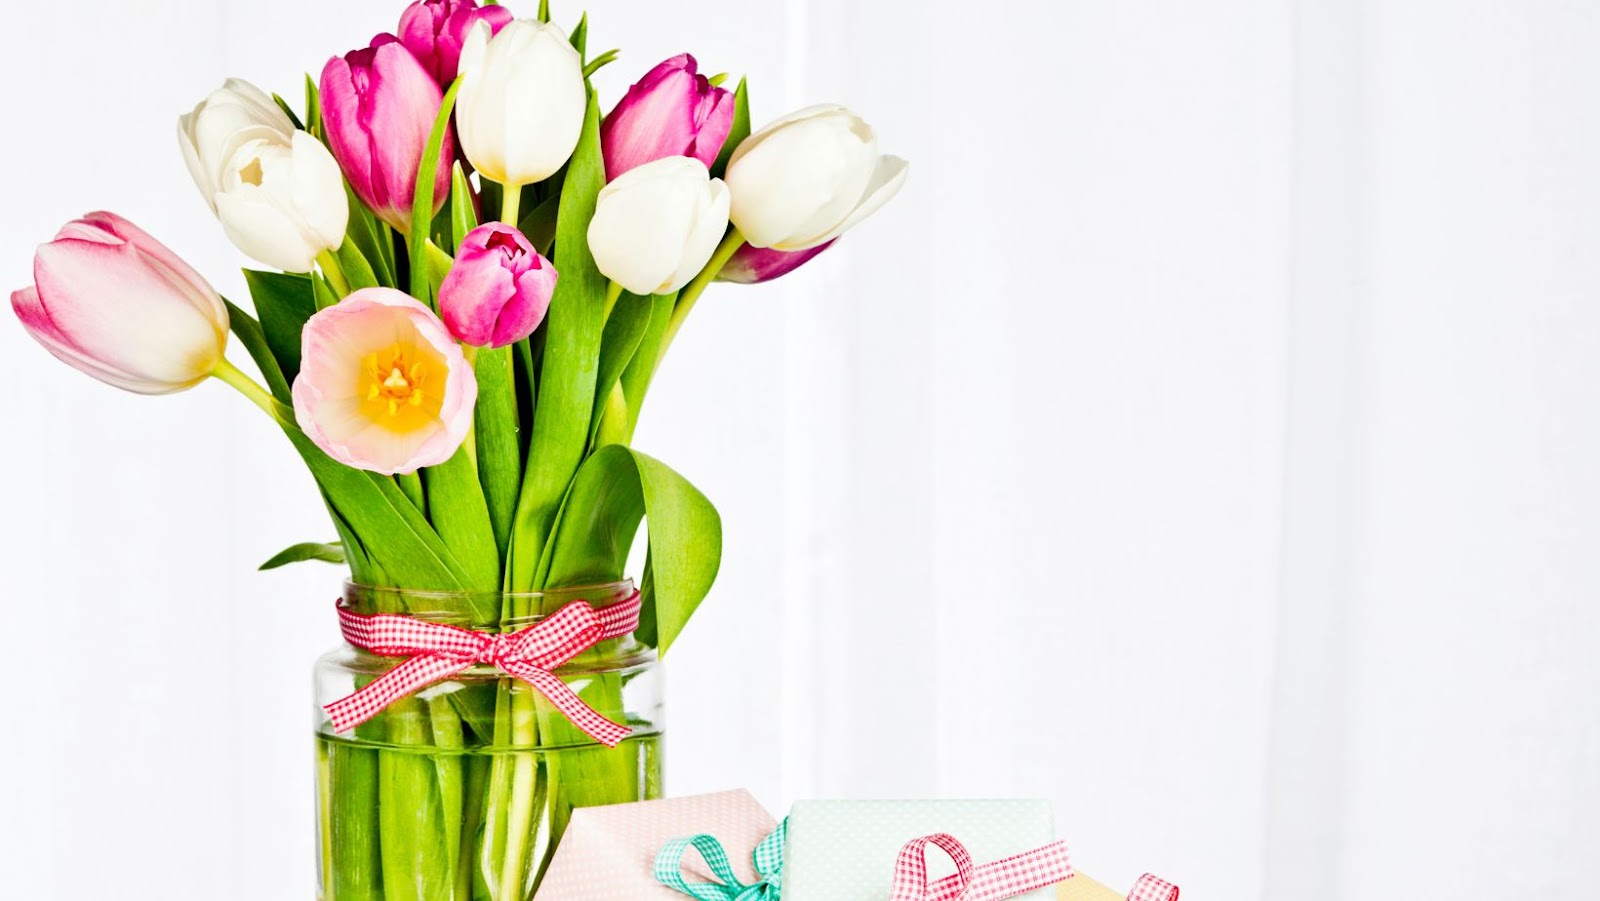 Mother's day gifts under $20 (7)